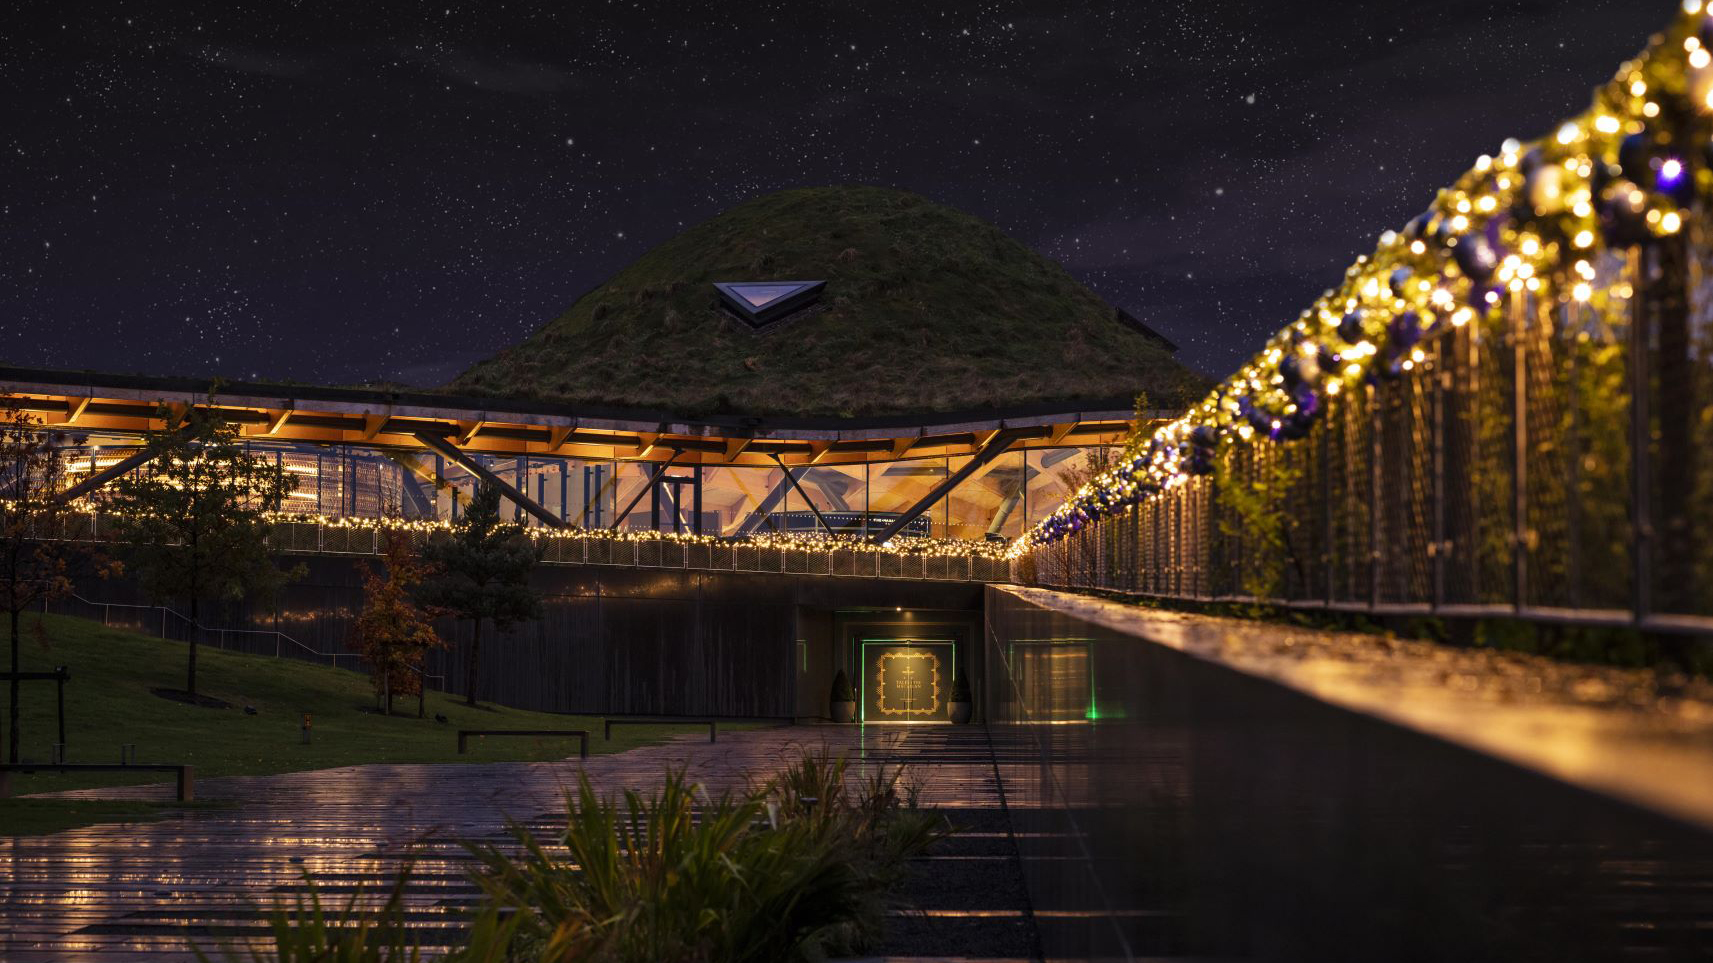 The Macallan Estate exterior with festive lighting